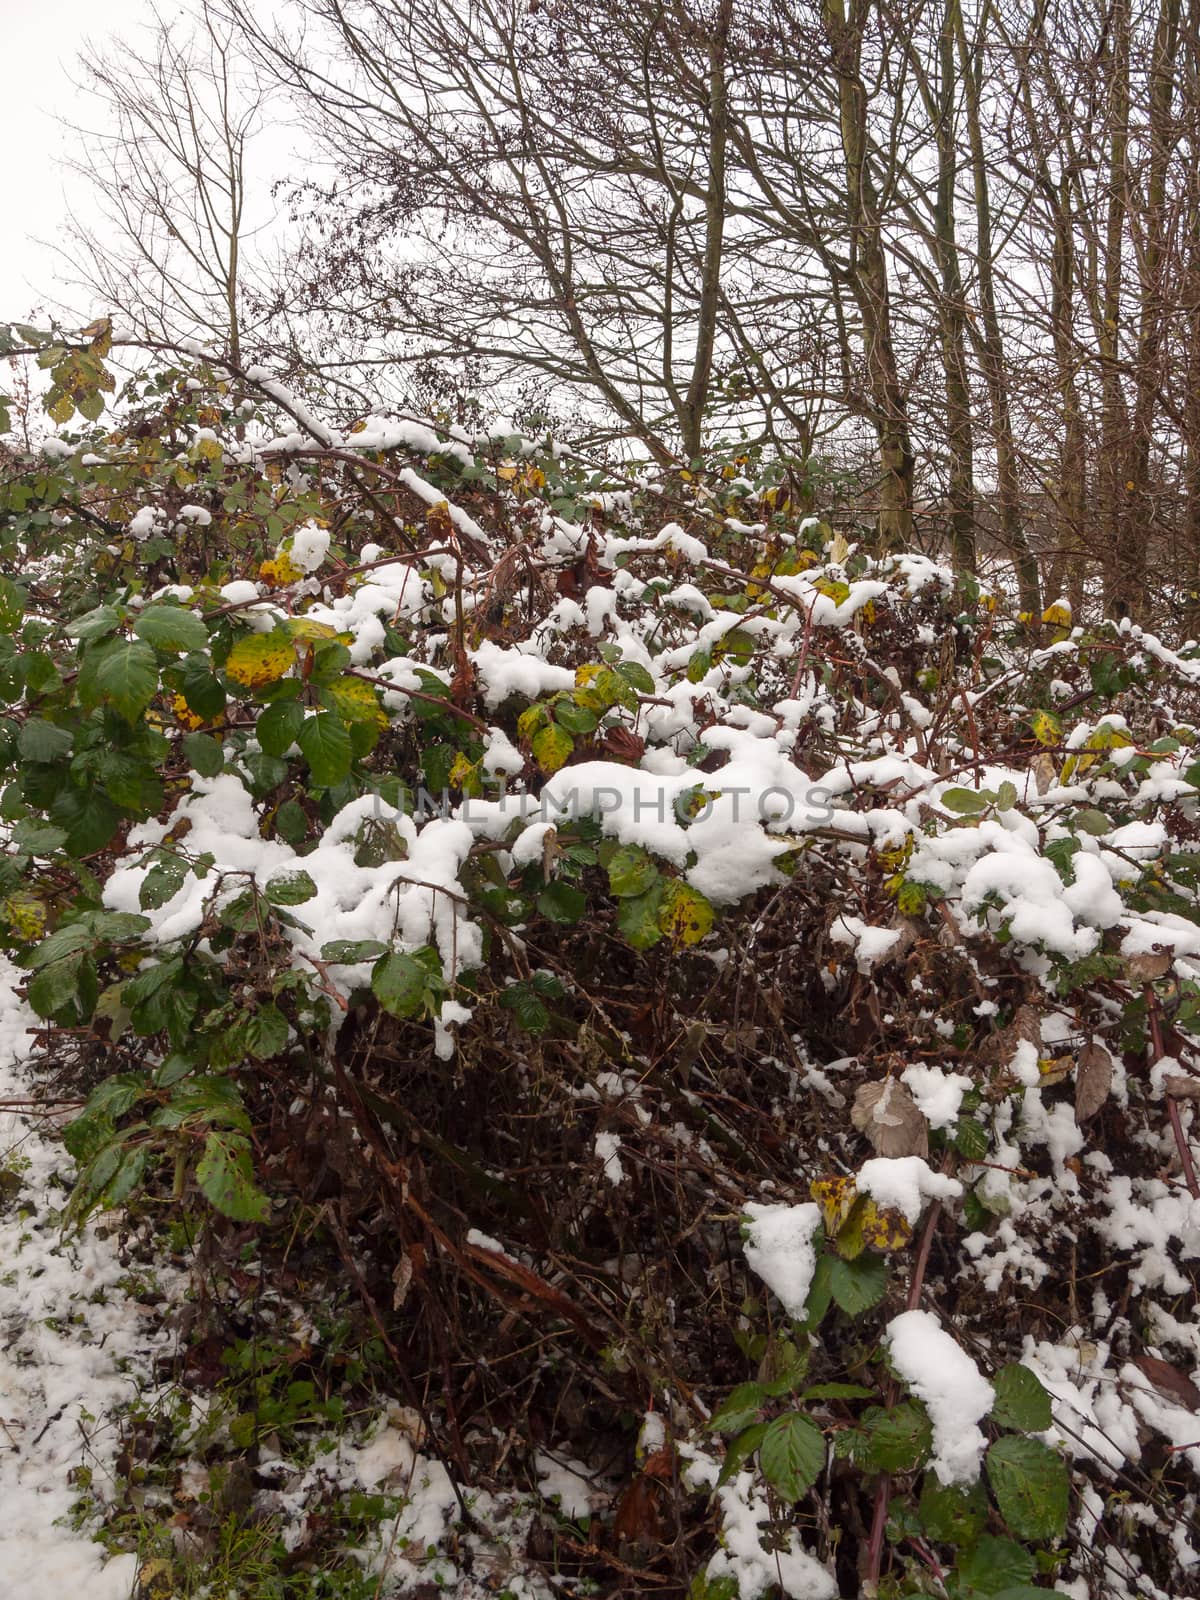 snow covered foliage outside forest green brown dead dying close by callumrc